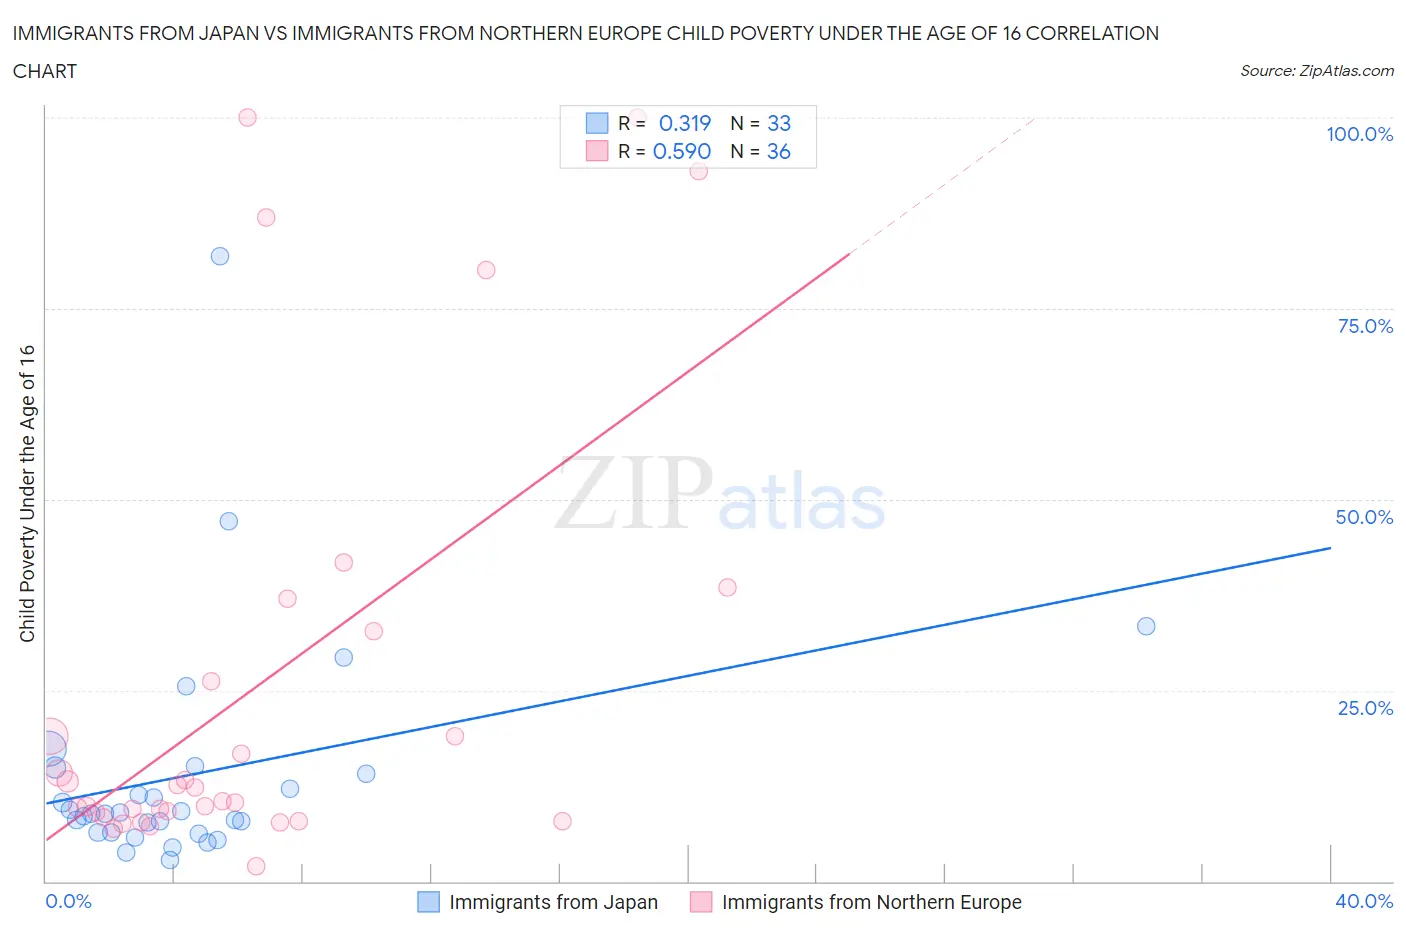 Immigrants from Japan vs Immigrants from Northern Europe Child Poverty Under the Age of 16